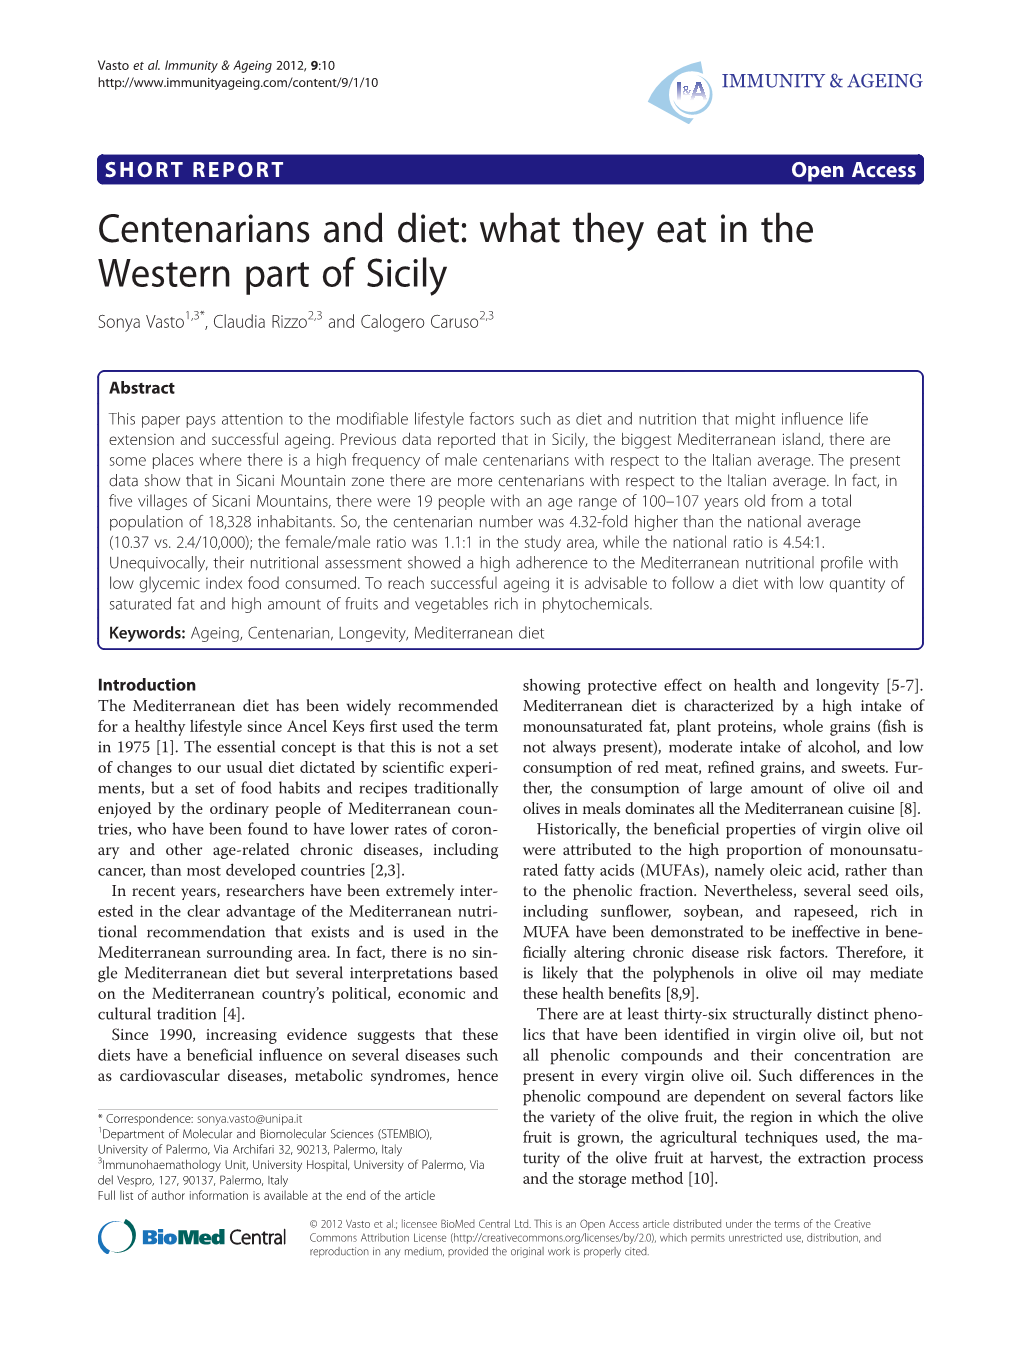 Centenarians and Diet: What They Eat in the Western Part of Sicily Sonya Vasto1,3*, Claudia Rizzo2,3 and Calogero Caruso2,3